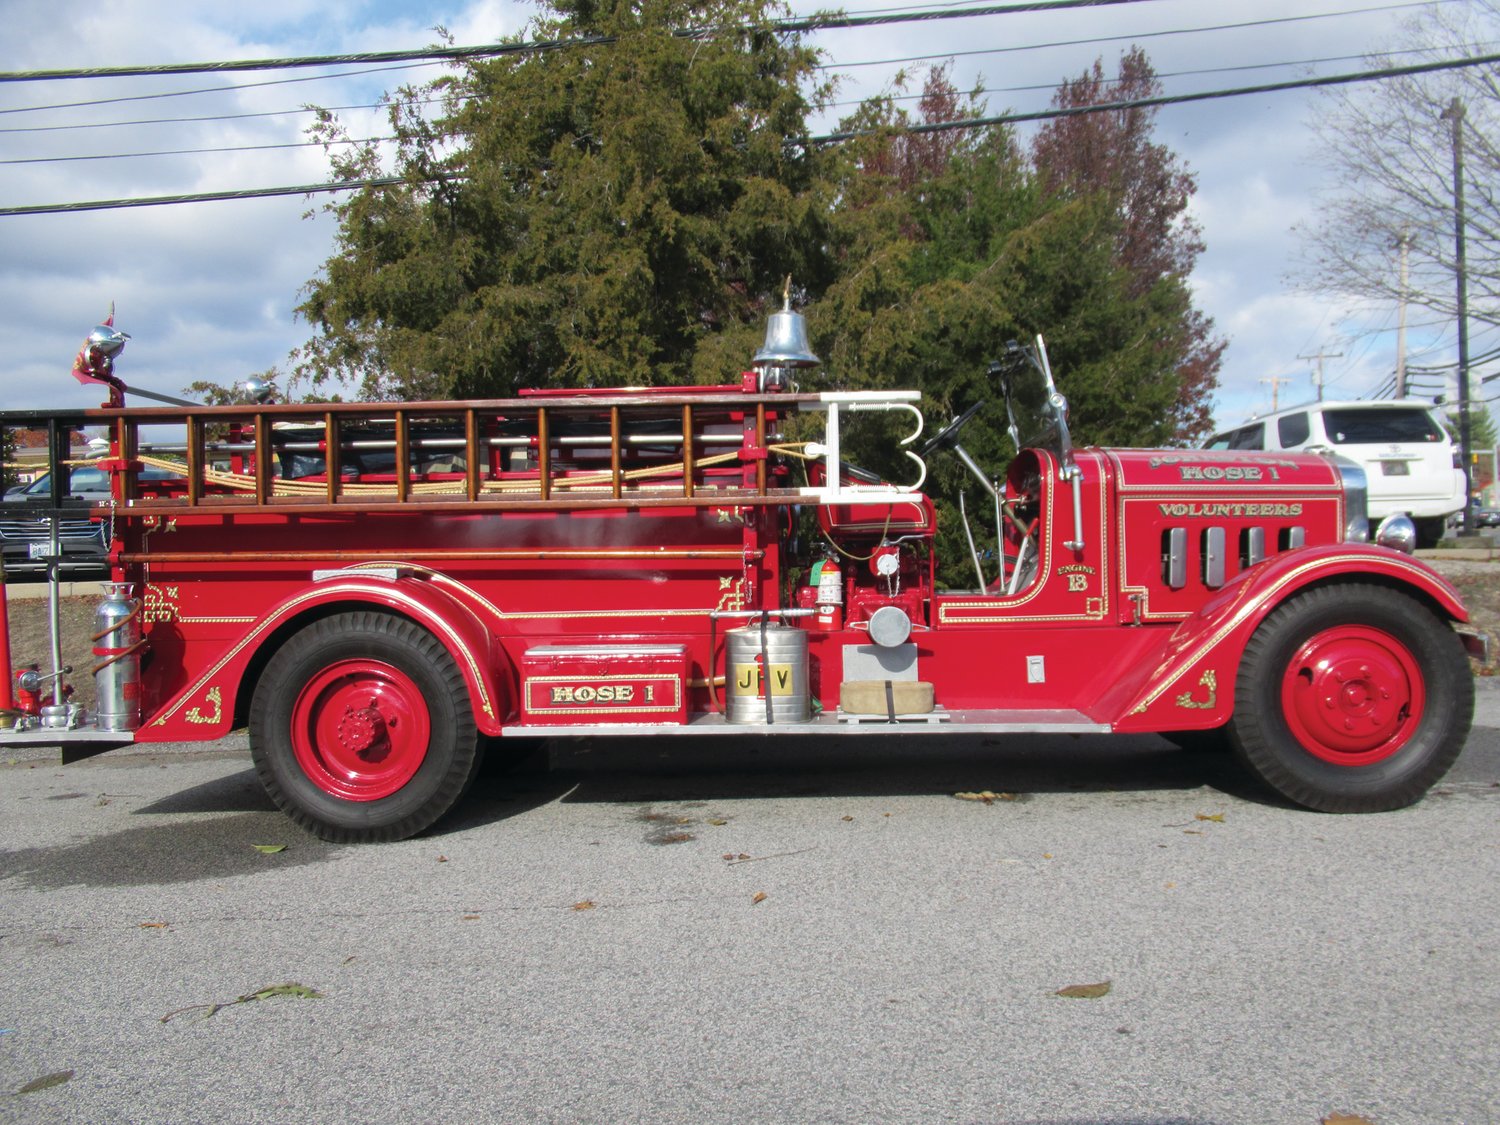 GRAND GIFT: This is the 1936 Maxim antique fire engine that Johnston Hose No. 1 Volunteer Company donated to the Johnston Association of Firefighters during last Friday’s unique ceremony.